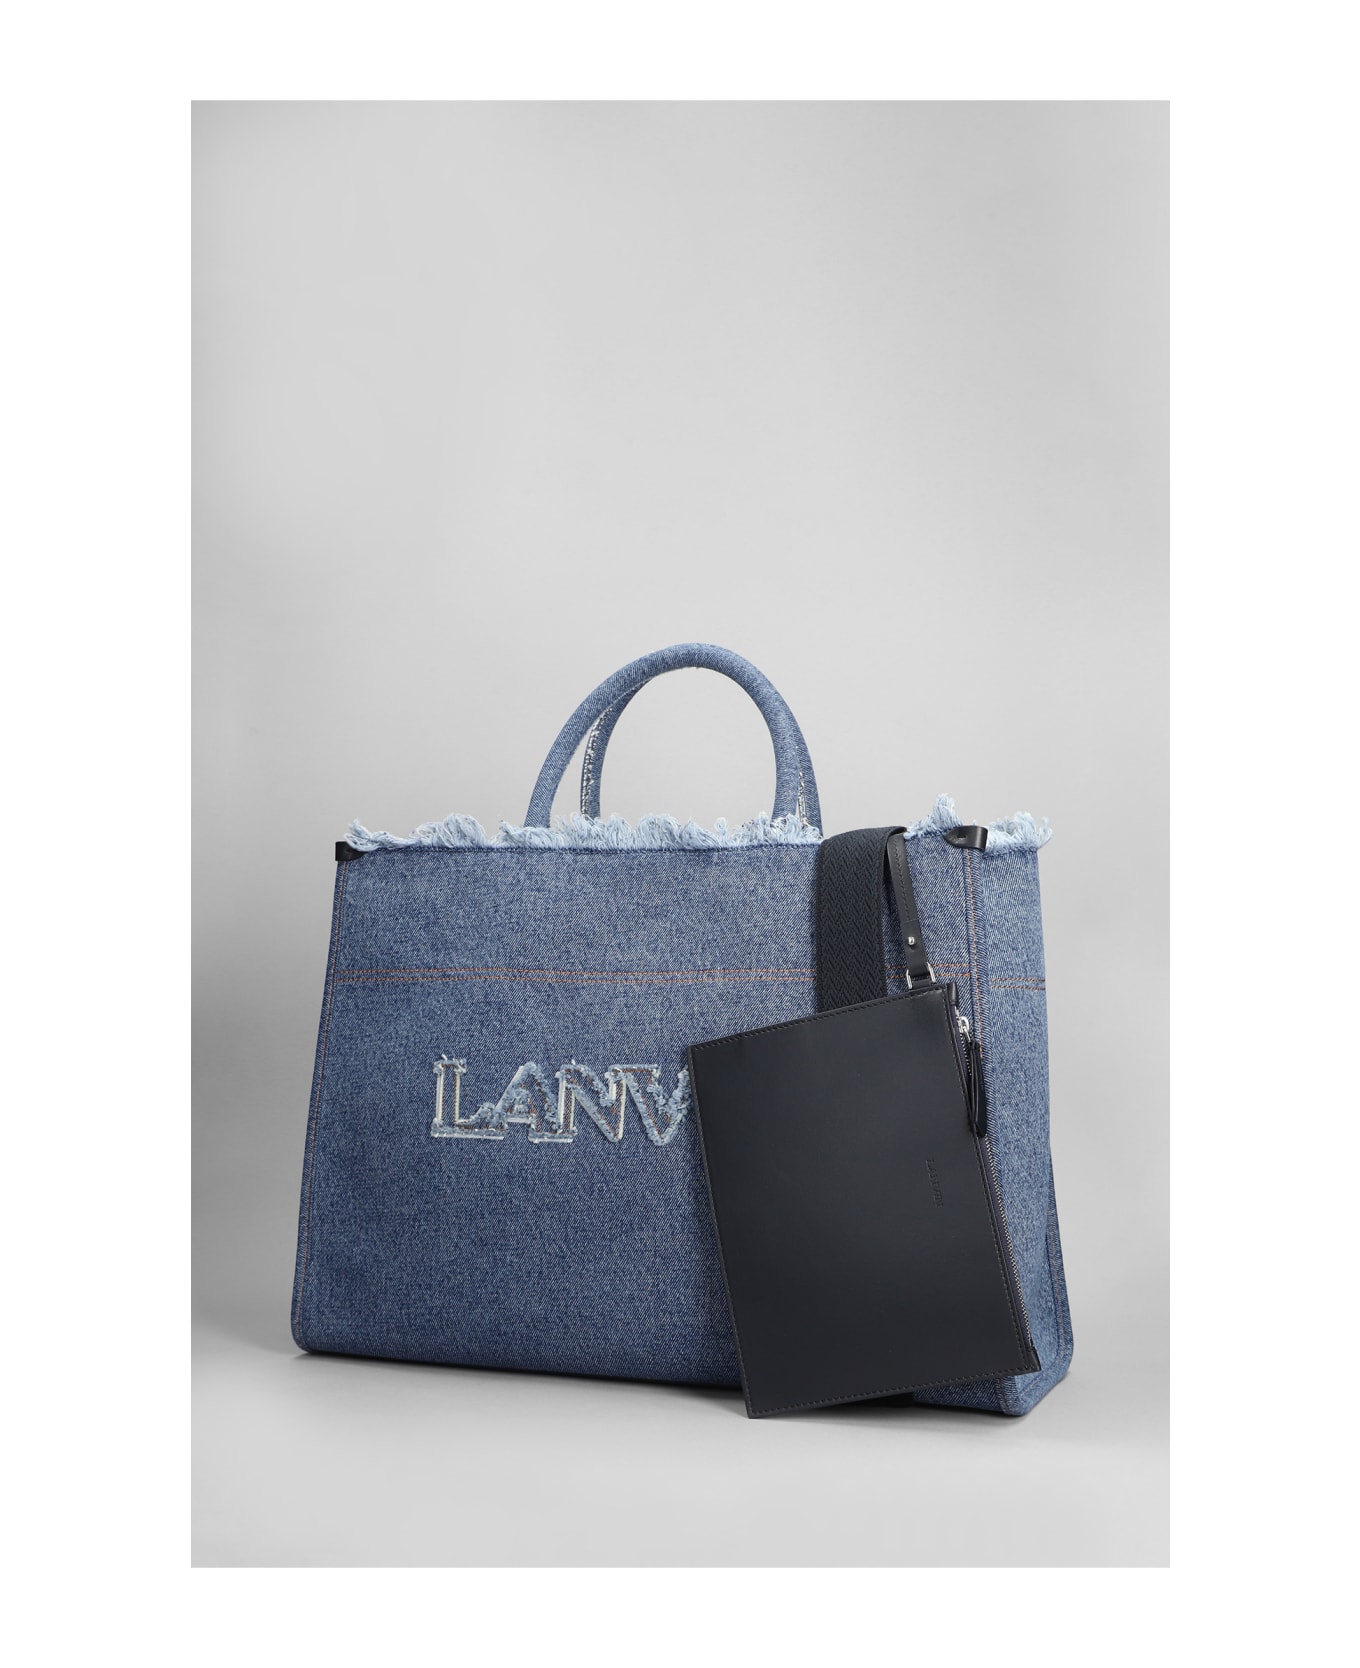 Lanvin Tote In Blue Cotton - blue トートバッグ